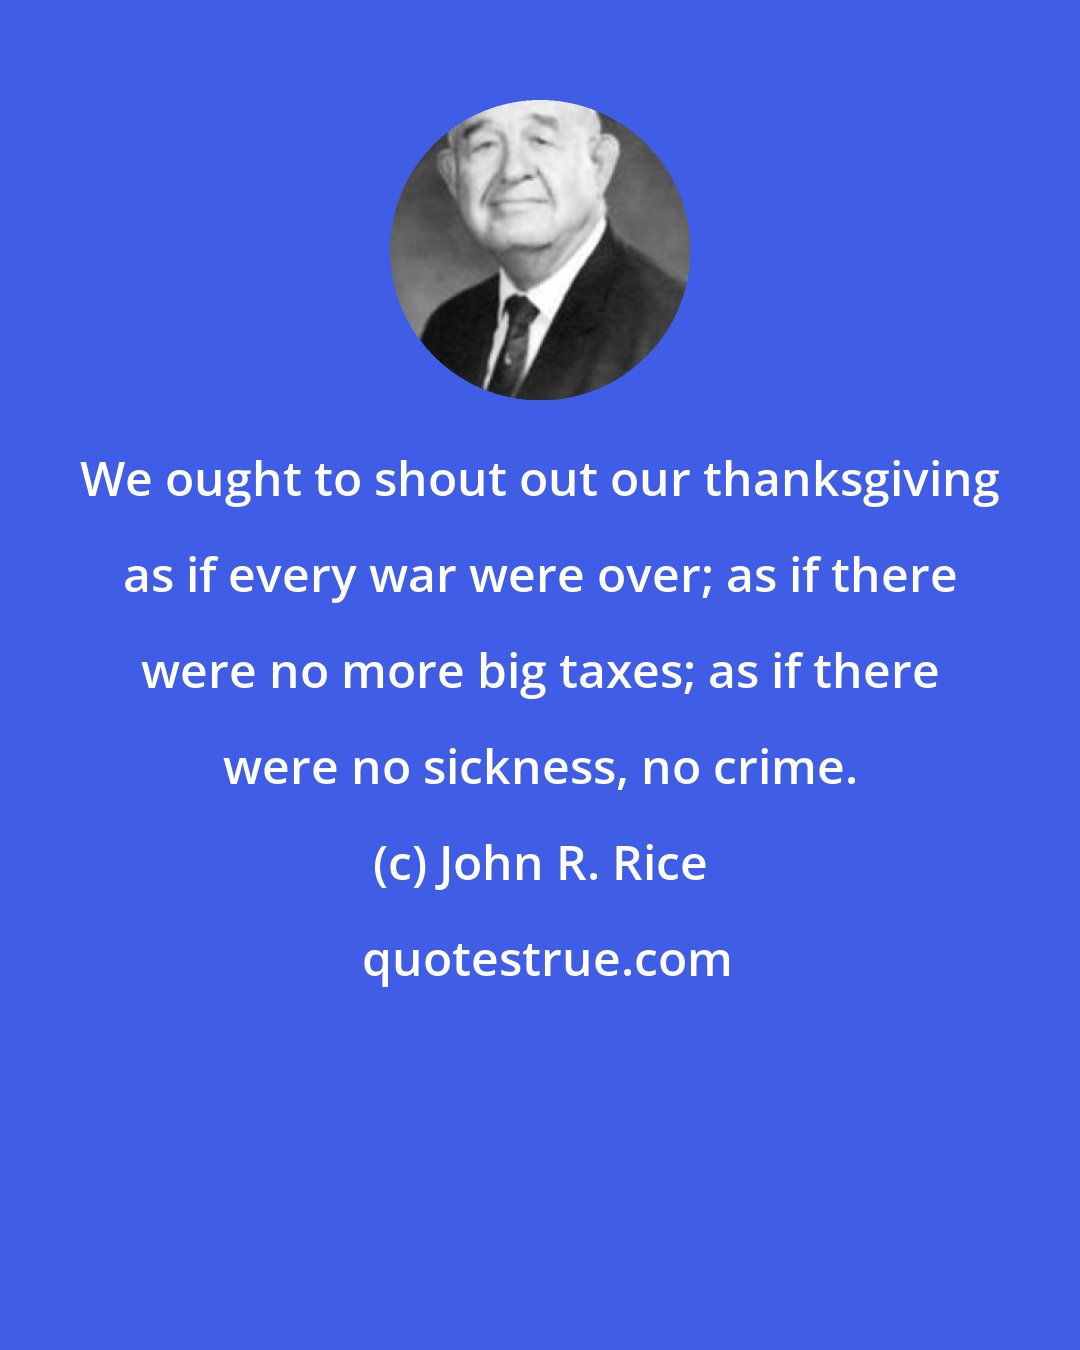 John R. Rice: We ought to shout out our thanksgiving as if every war were over; as if there were no more big taxes; as if there were no sickness, no crime.